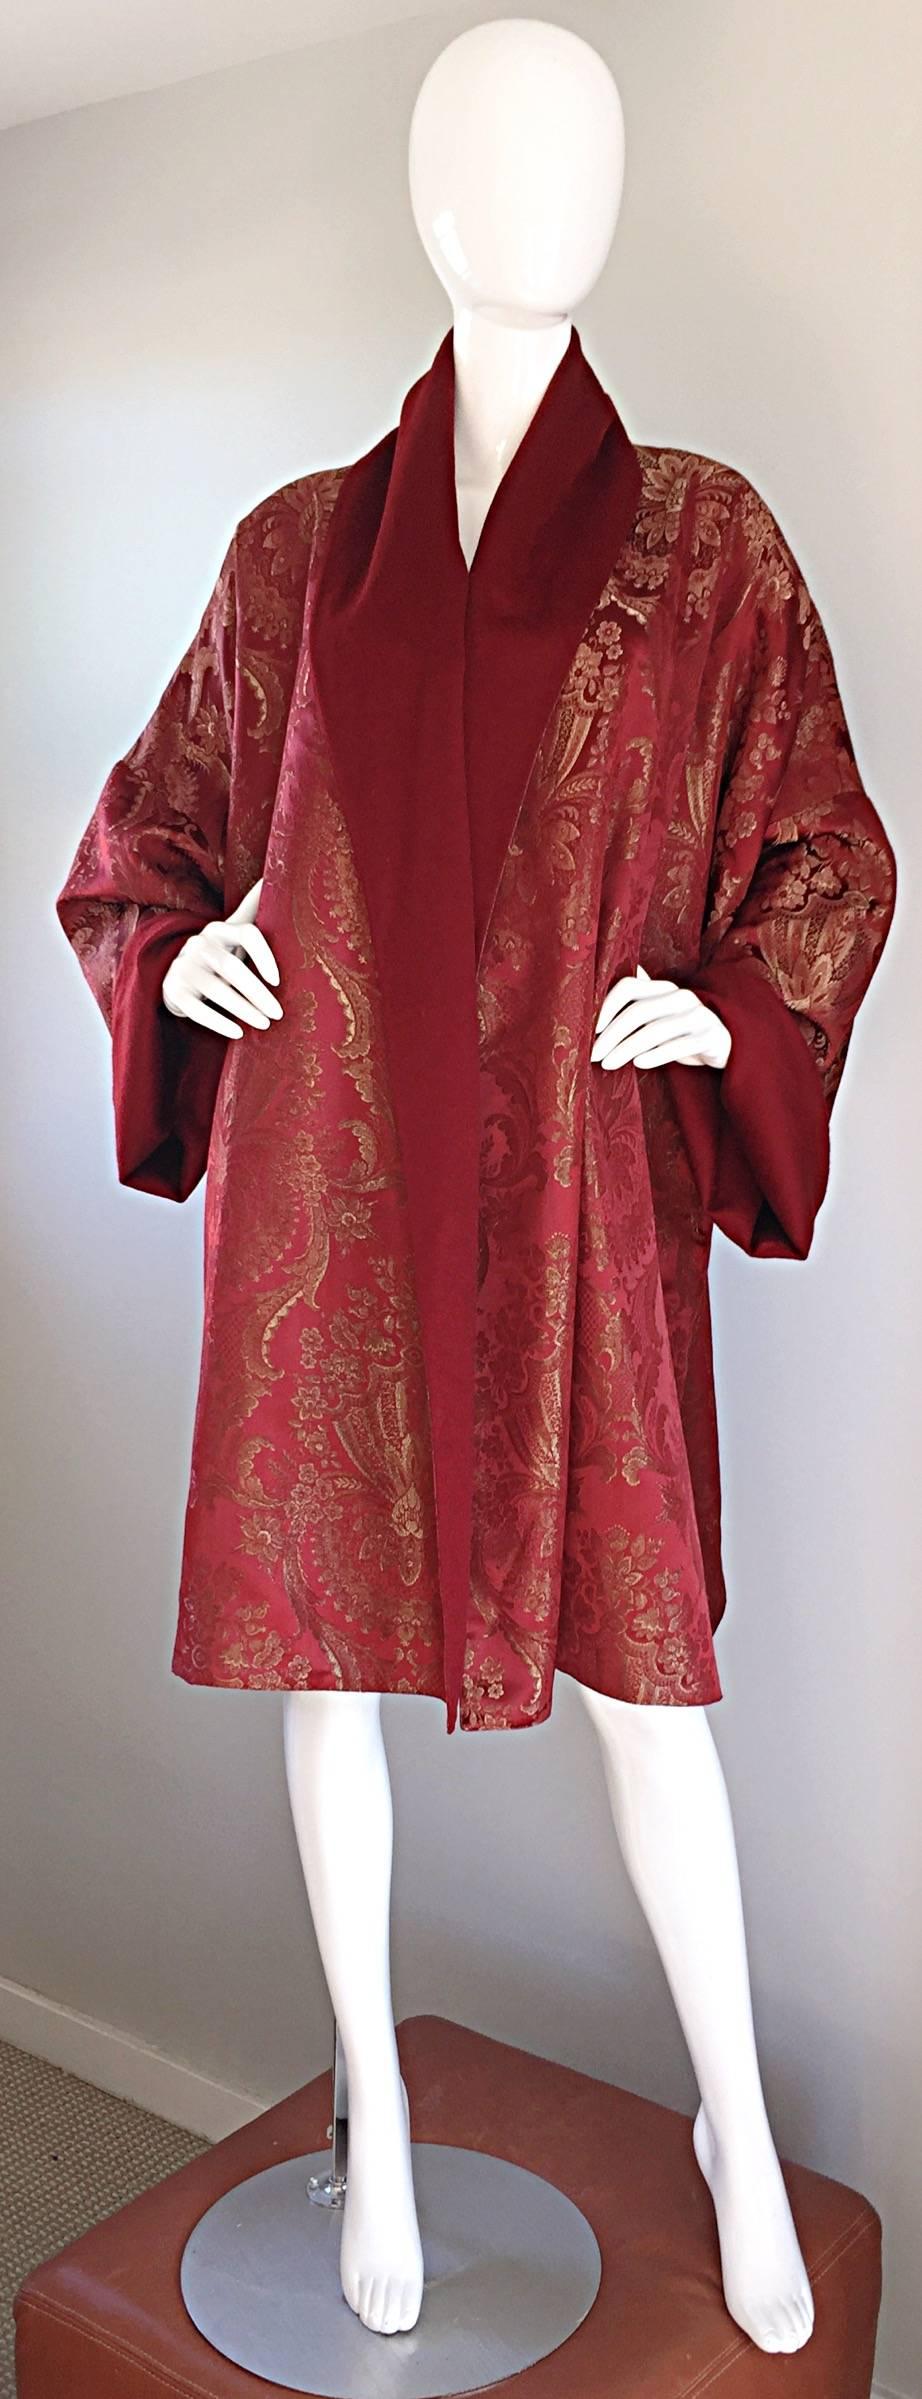 Museum worthy vintage ROMEO GIGLI wine colored reversible opera / evening jacket kimono! Fine burgundy silk, with hand-sewn gold silk threaded paisley throughout. Reversible to a cashmere burgundy. Pockets at both sides of the waist. Couture